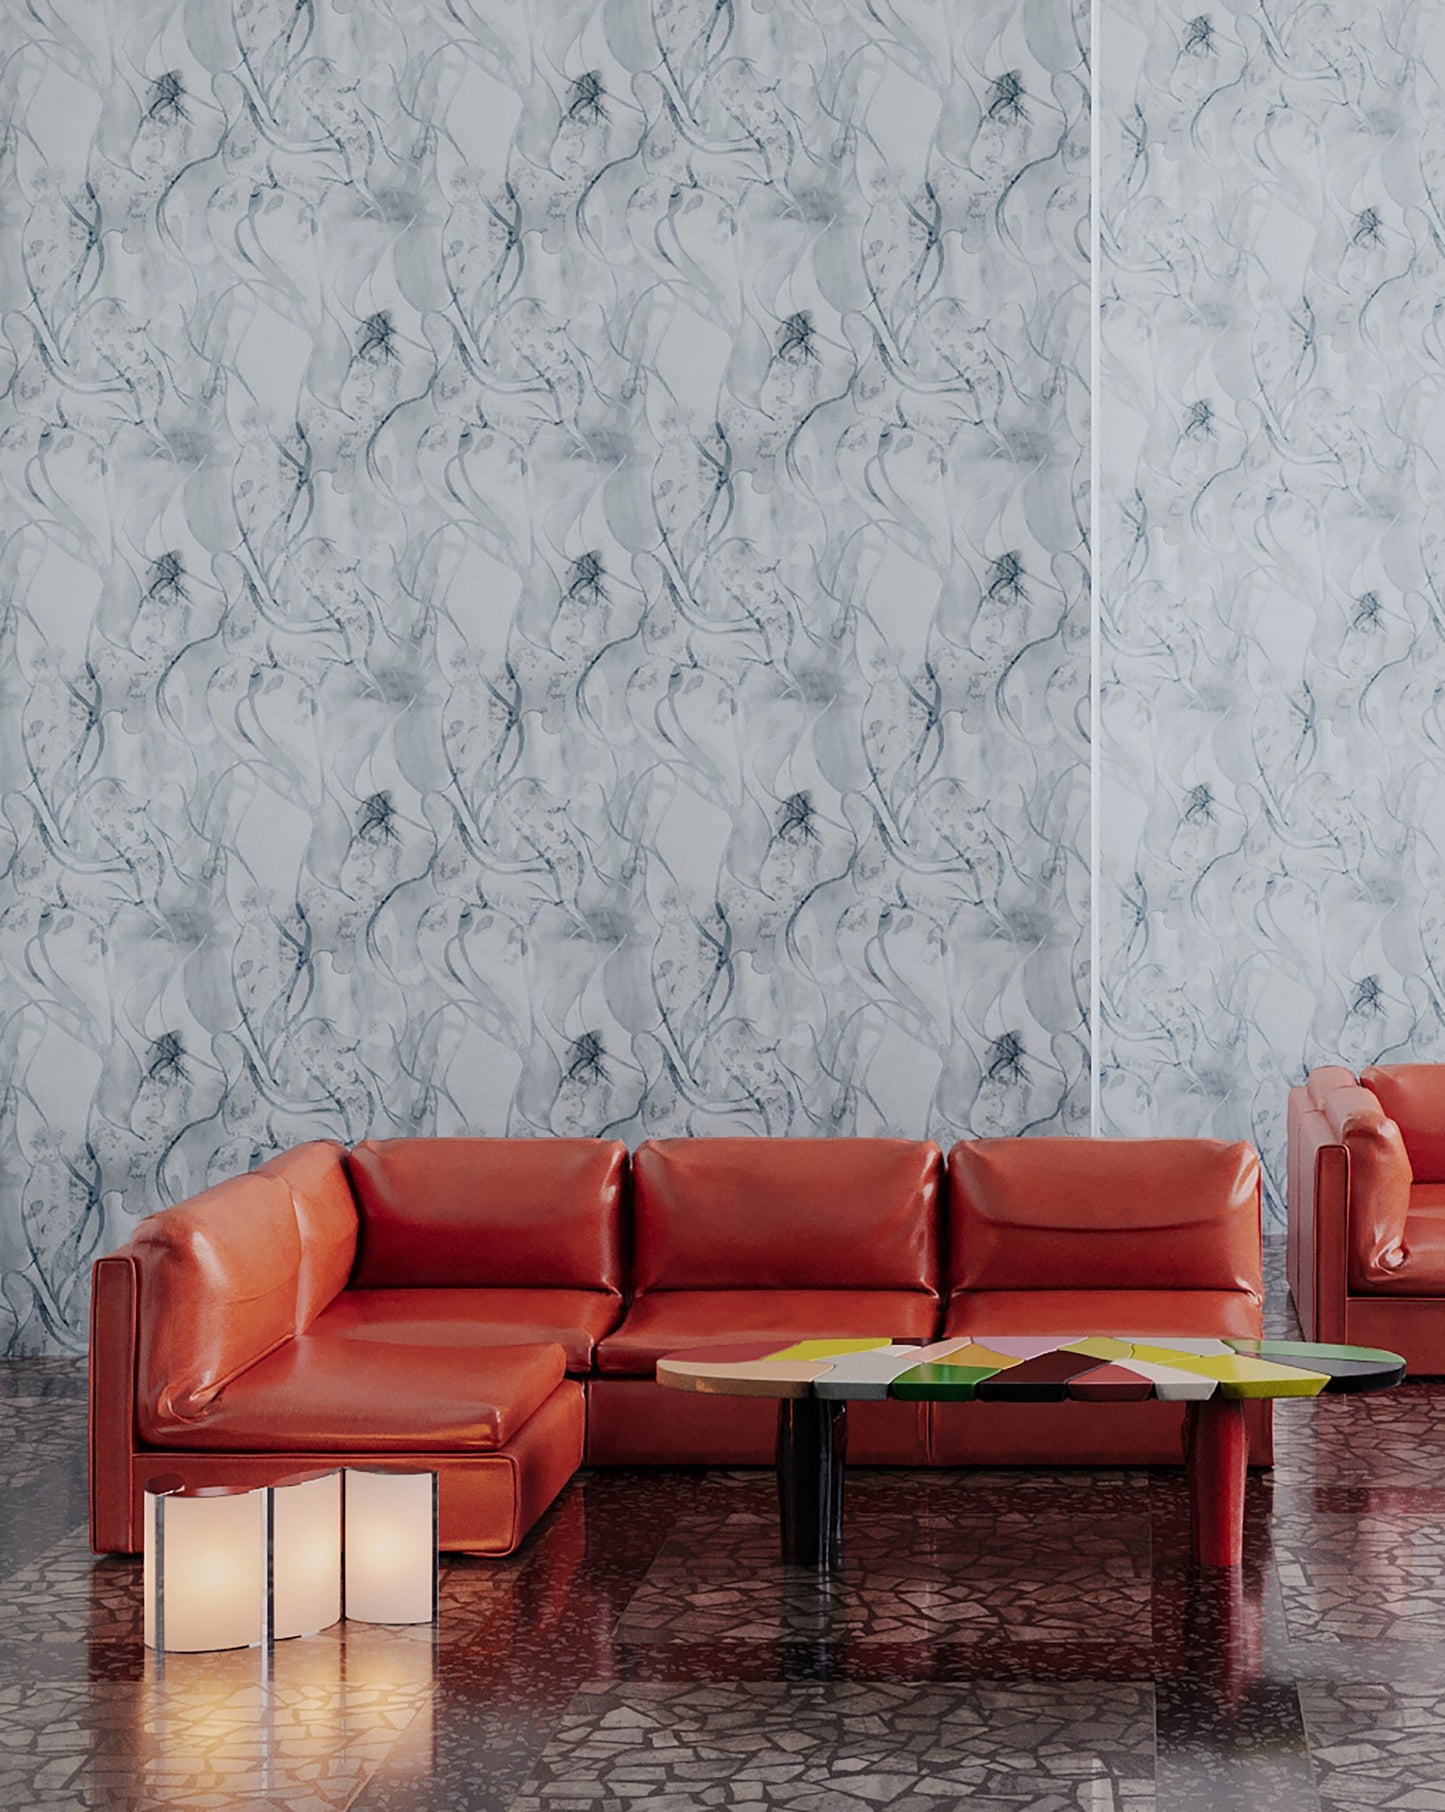 Eskayel's Hibiscus Lily Lapis wallpaper is a blue hued  pattern installed in a sitting room.